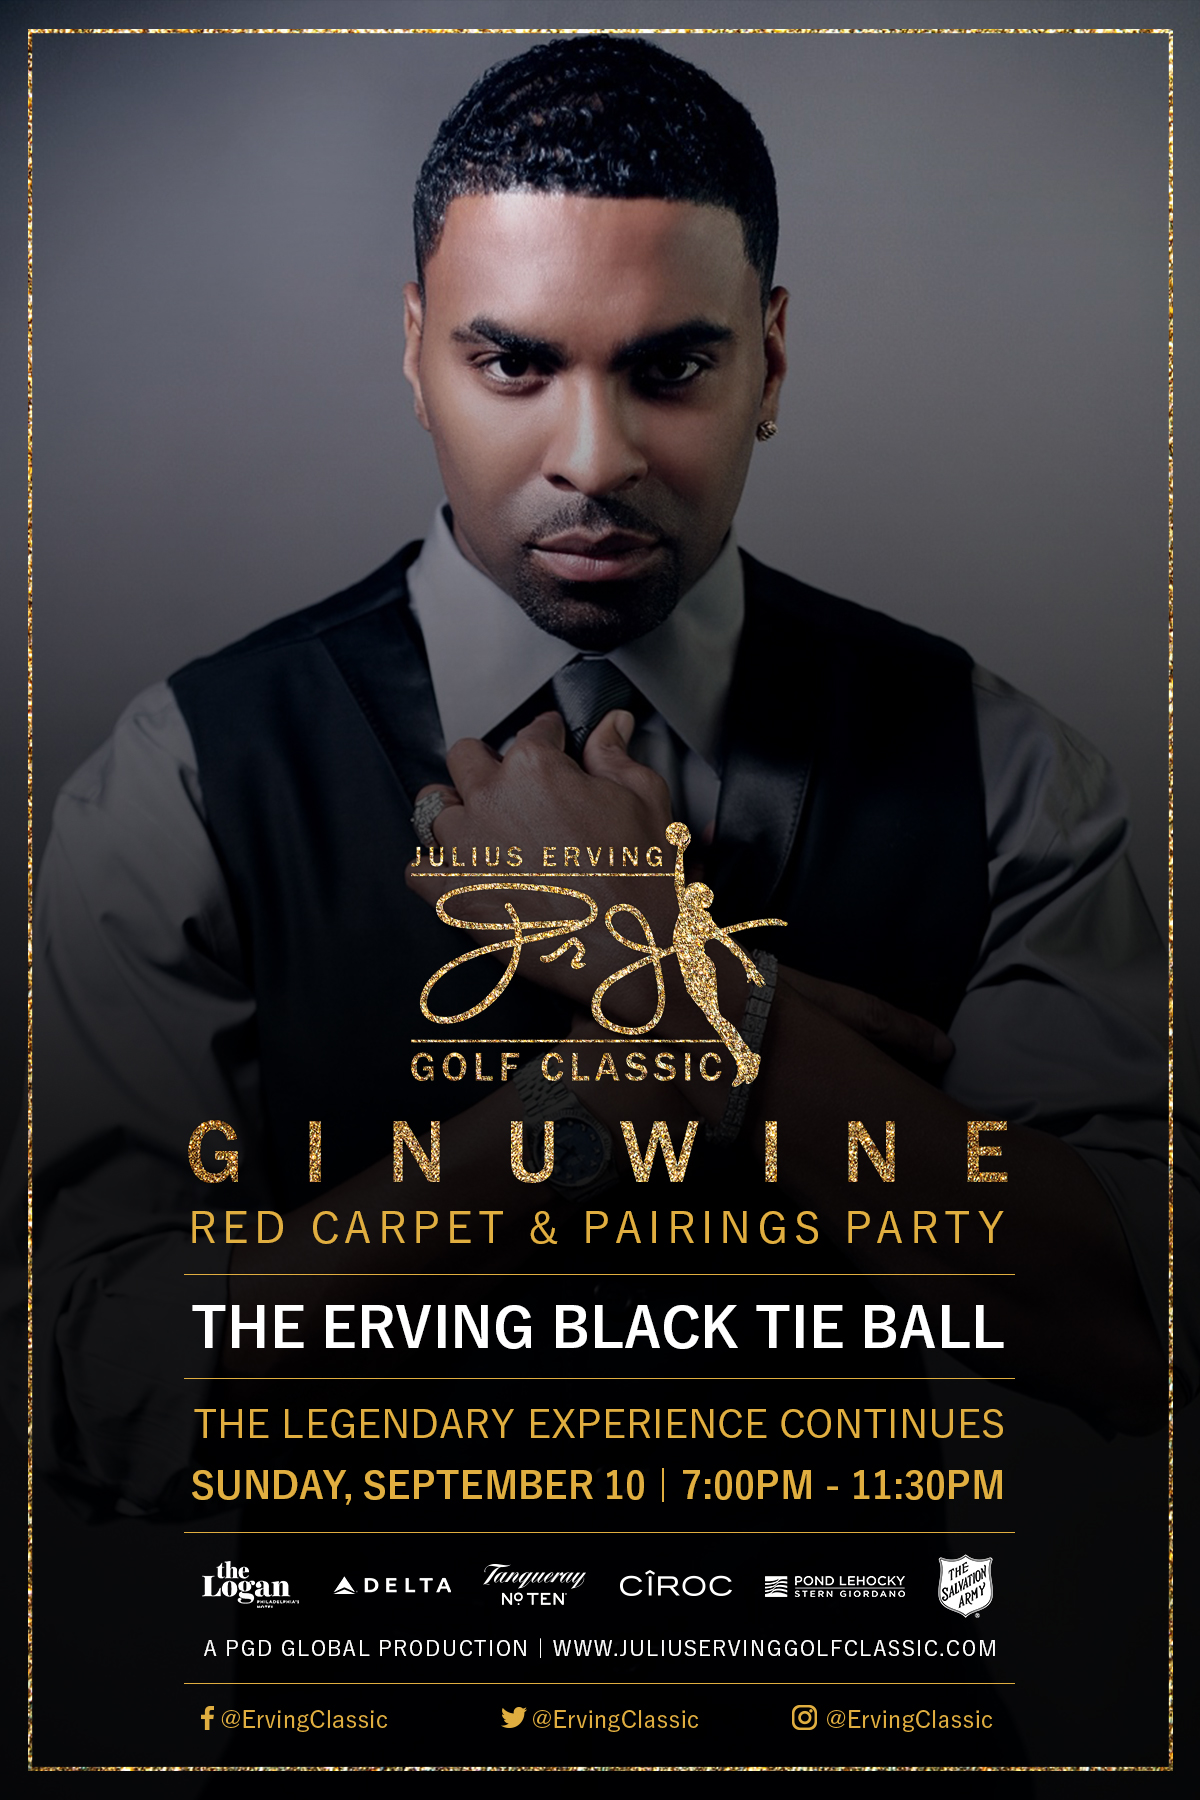 Official Invitation Card for The Erving Black Tie Ball, Red Carpet & Pairings Party at The Logan Hotel with Ginuwine